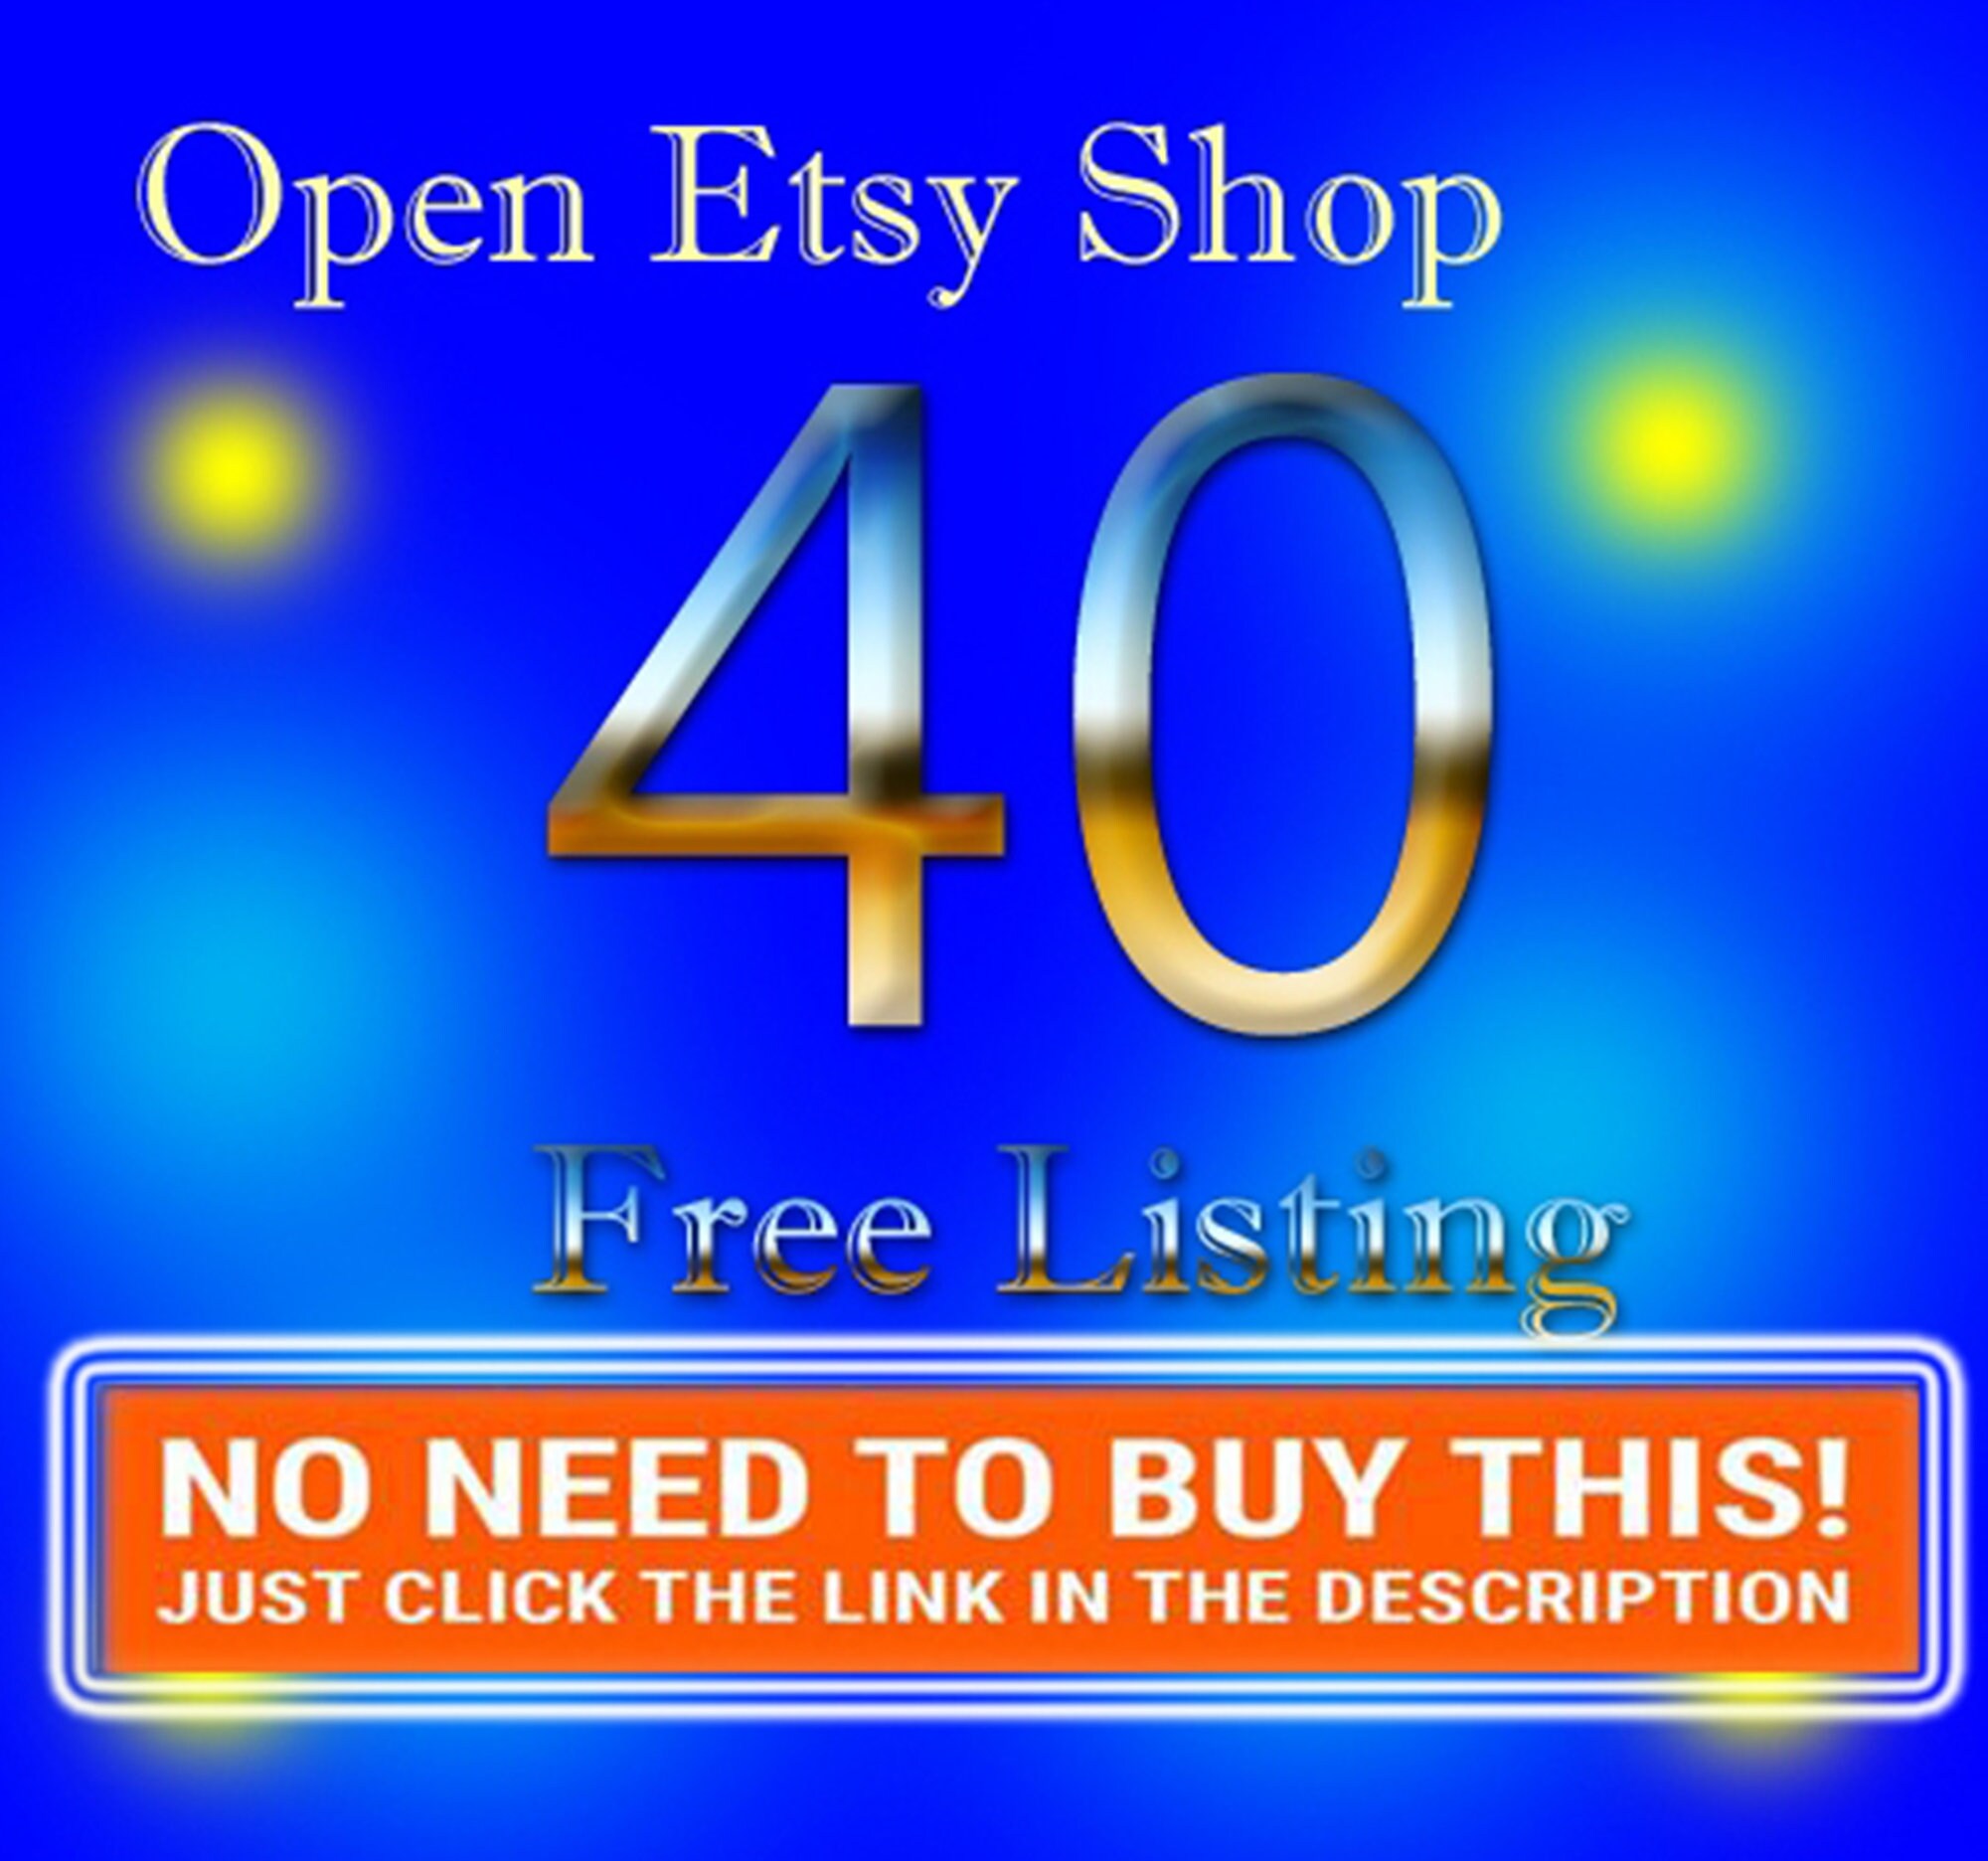 40 Free Listings Link Free Sign Up Free 40 Listings Etsy - Etsy